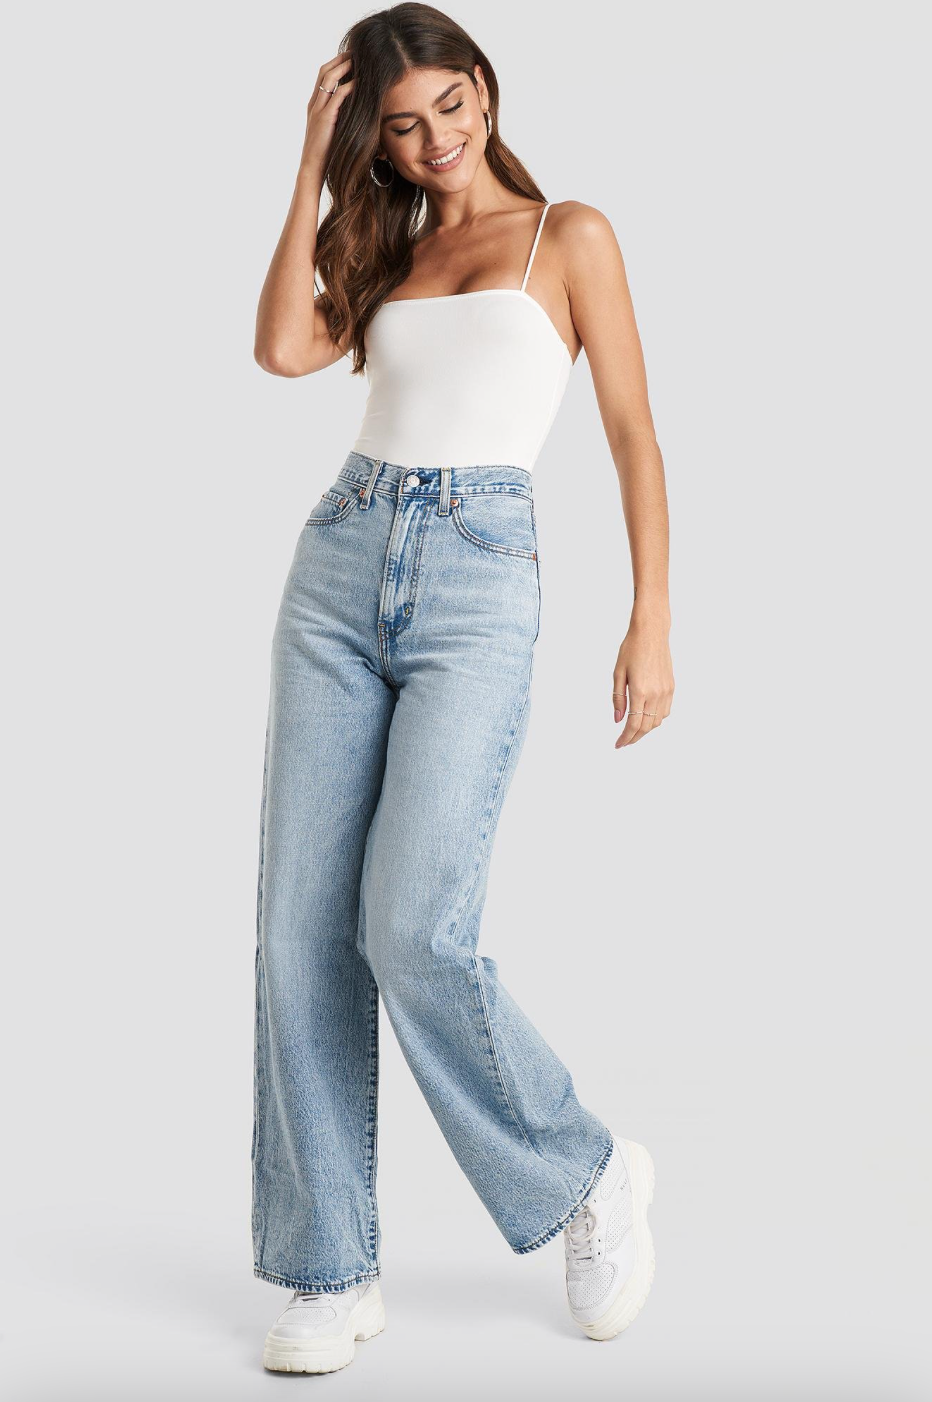 Levi's Ribcage Wide Leg Jeans - Far And Wide Light Wash